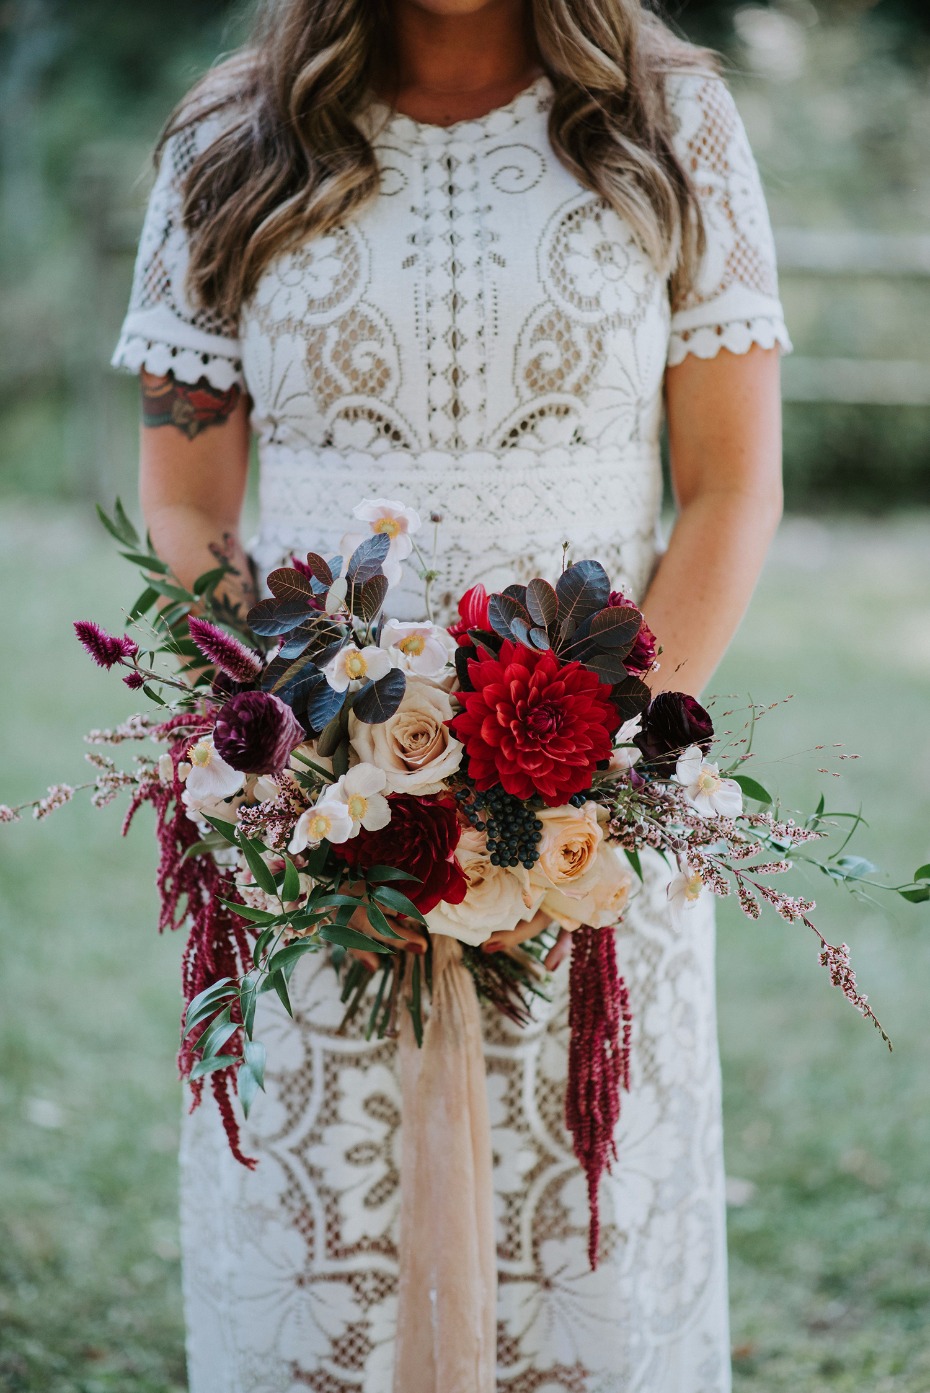 Gorgeous bouquet with a pop of red